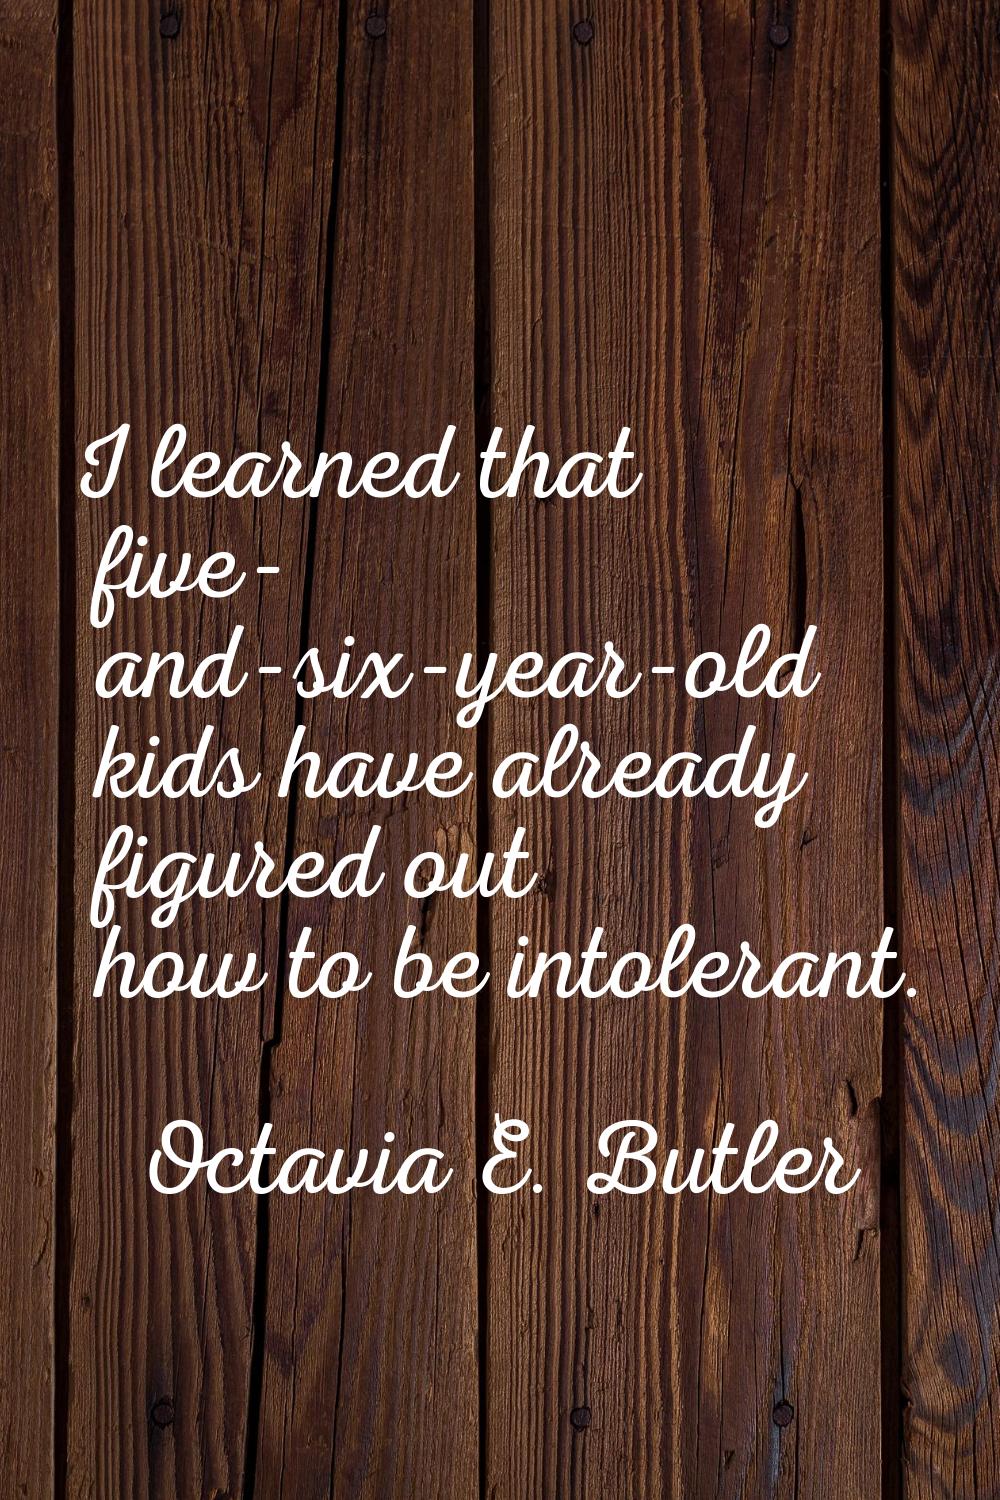 I learned that five- and-six-year-old kids have already figured out how to be intolerant.